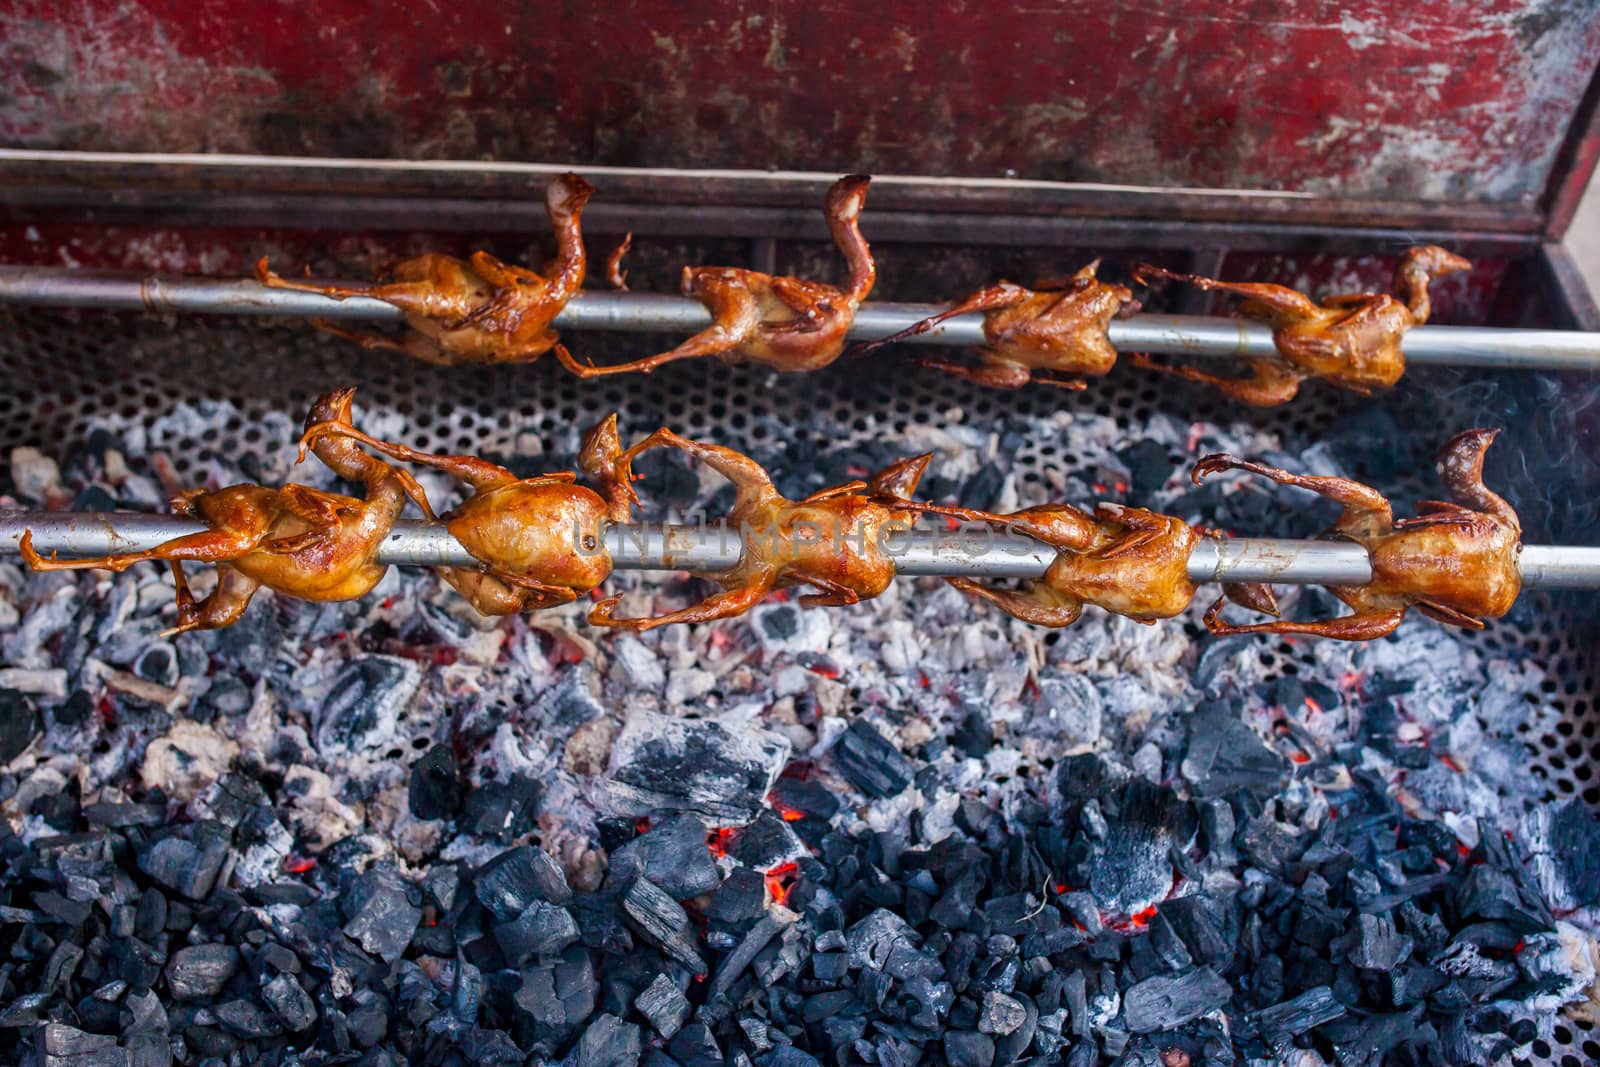 Grilled chickens on the bbq stove by nopparats